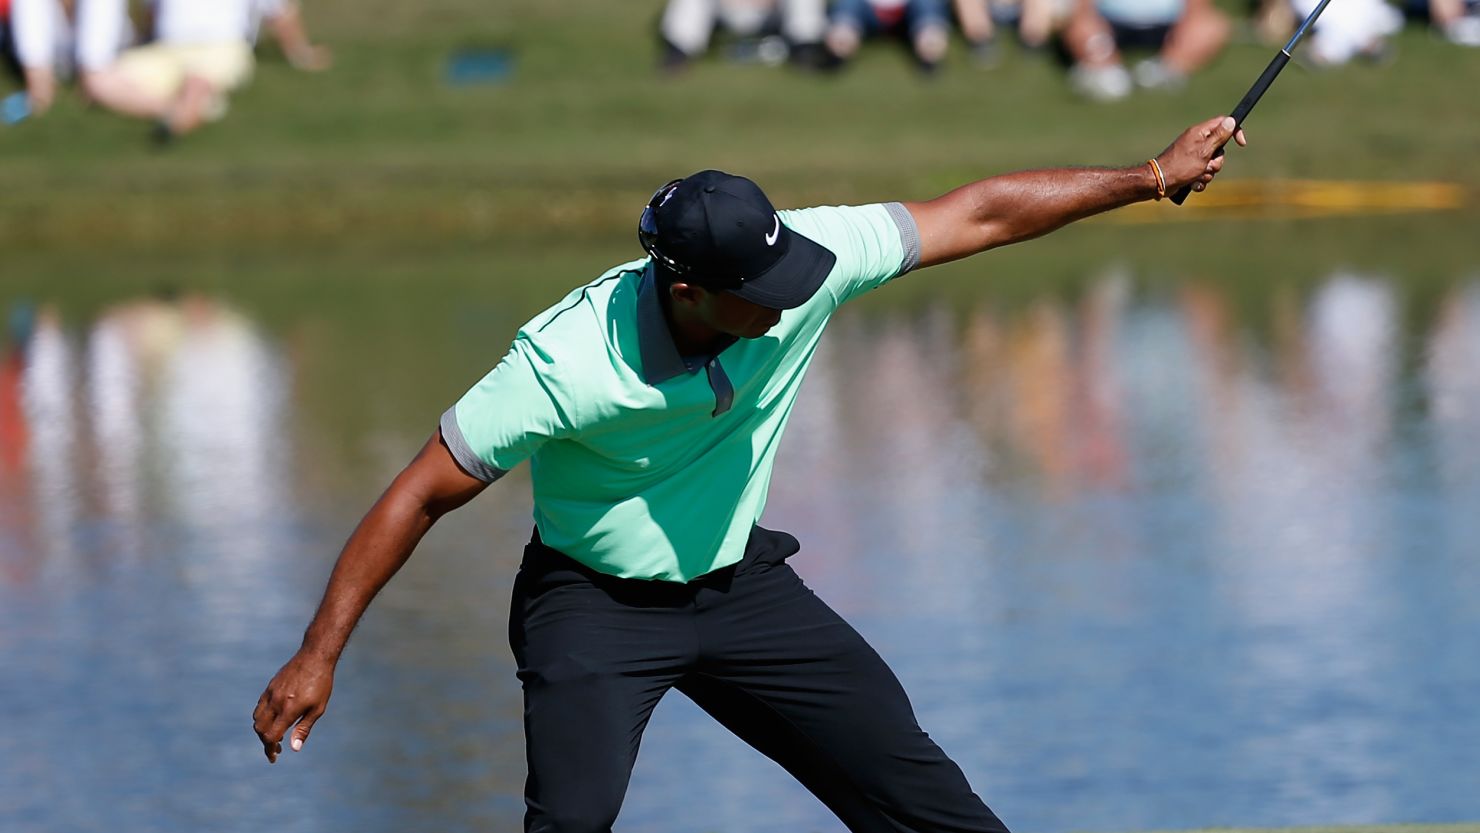 Tiger Woods wills his ball in the hole for a fine birdie on the 15th at Doral.